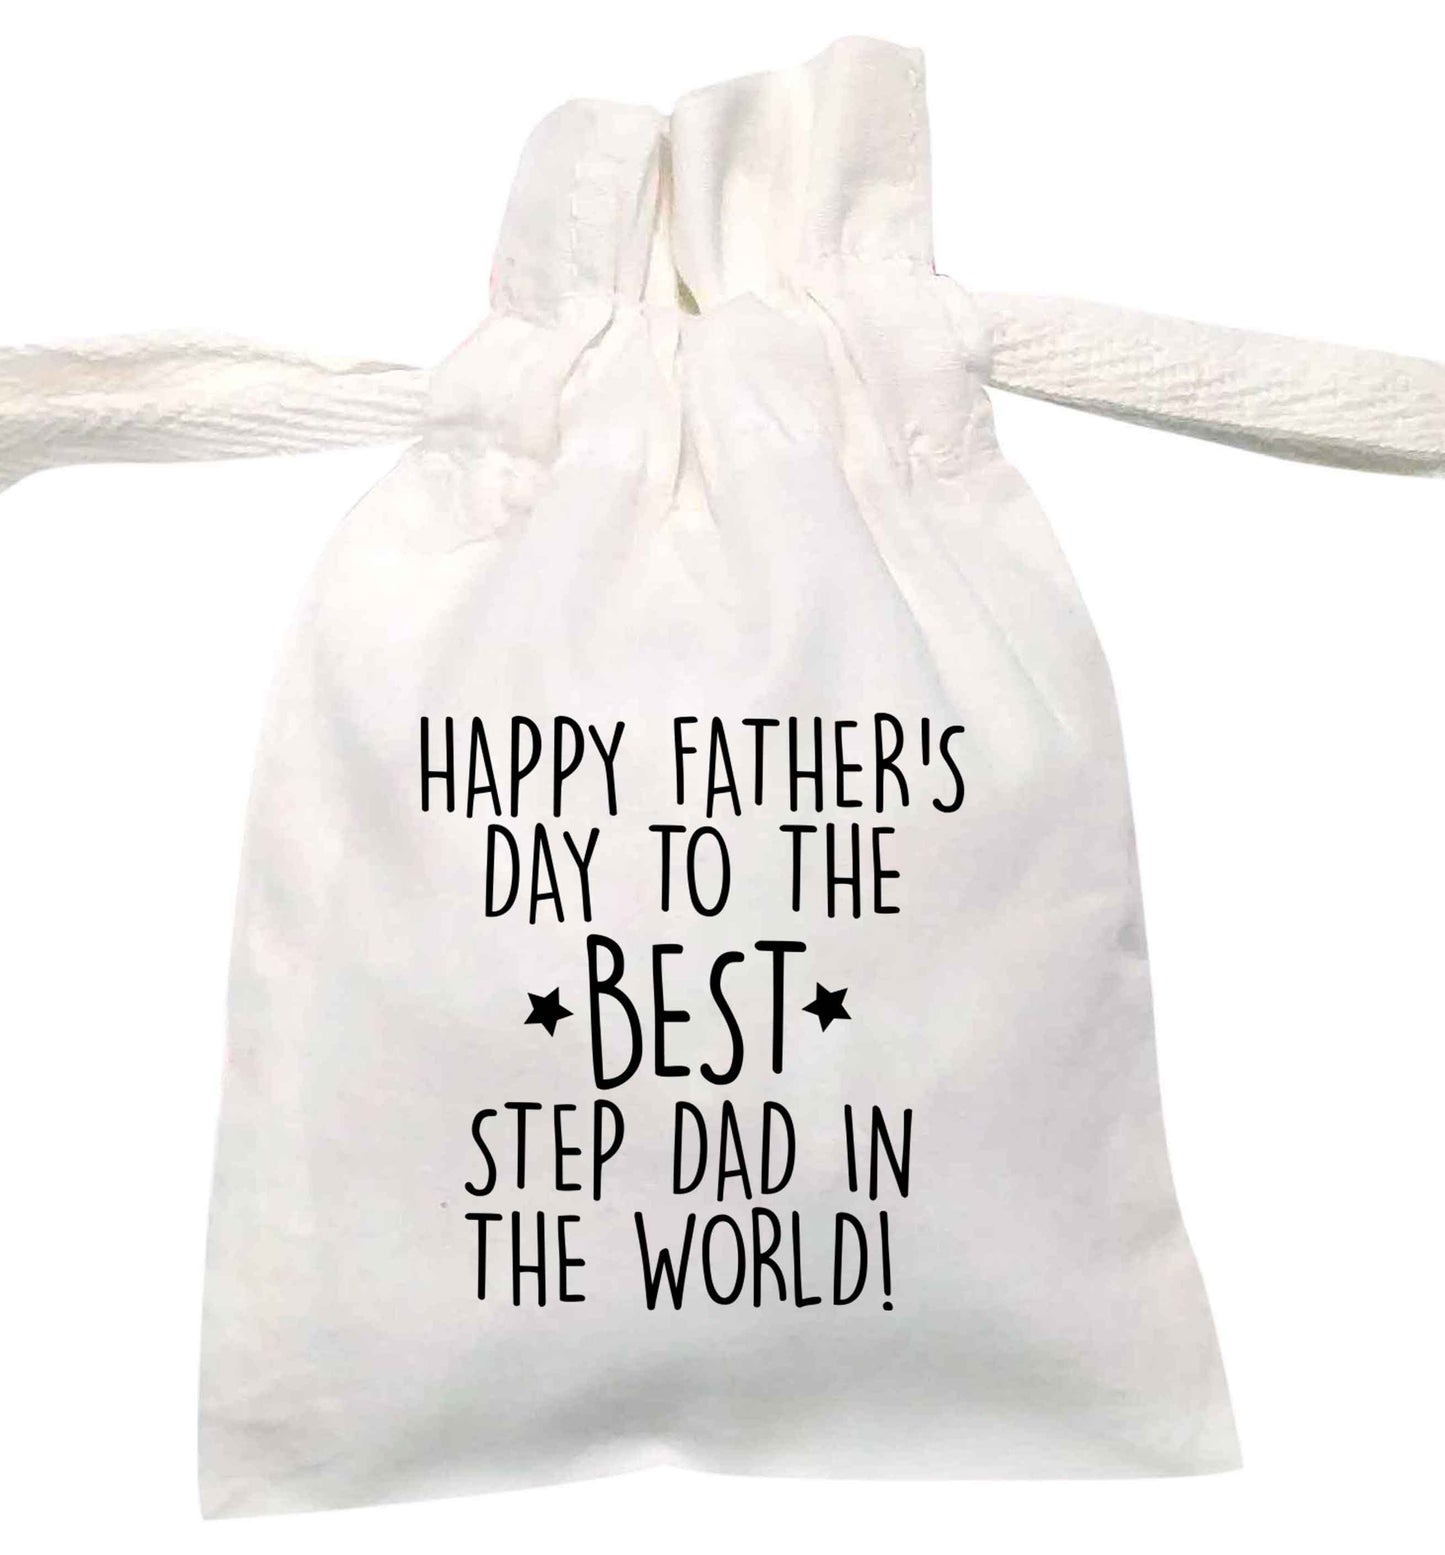 Happy Father's Day to the best step dad in the world! | XS - L | Pouch / Drawstring bag / Sack | Organic Cotton | Bulk discounts available!